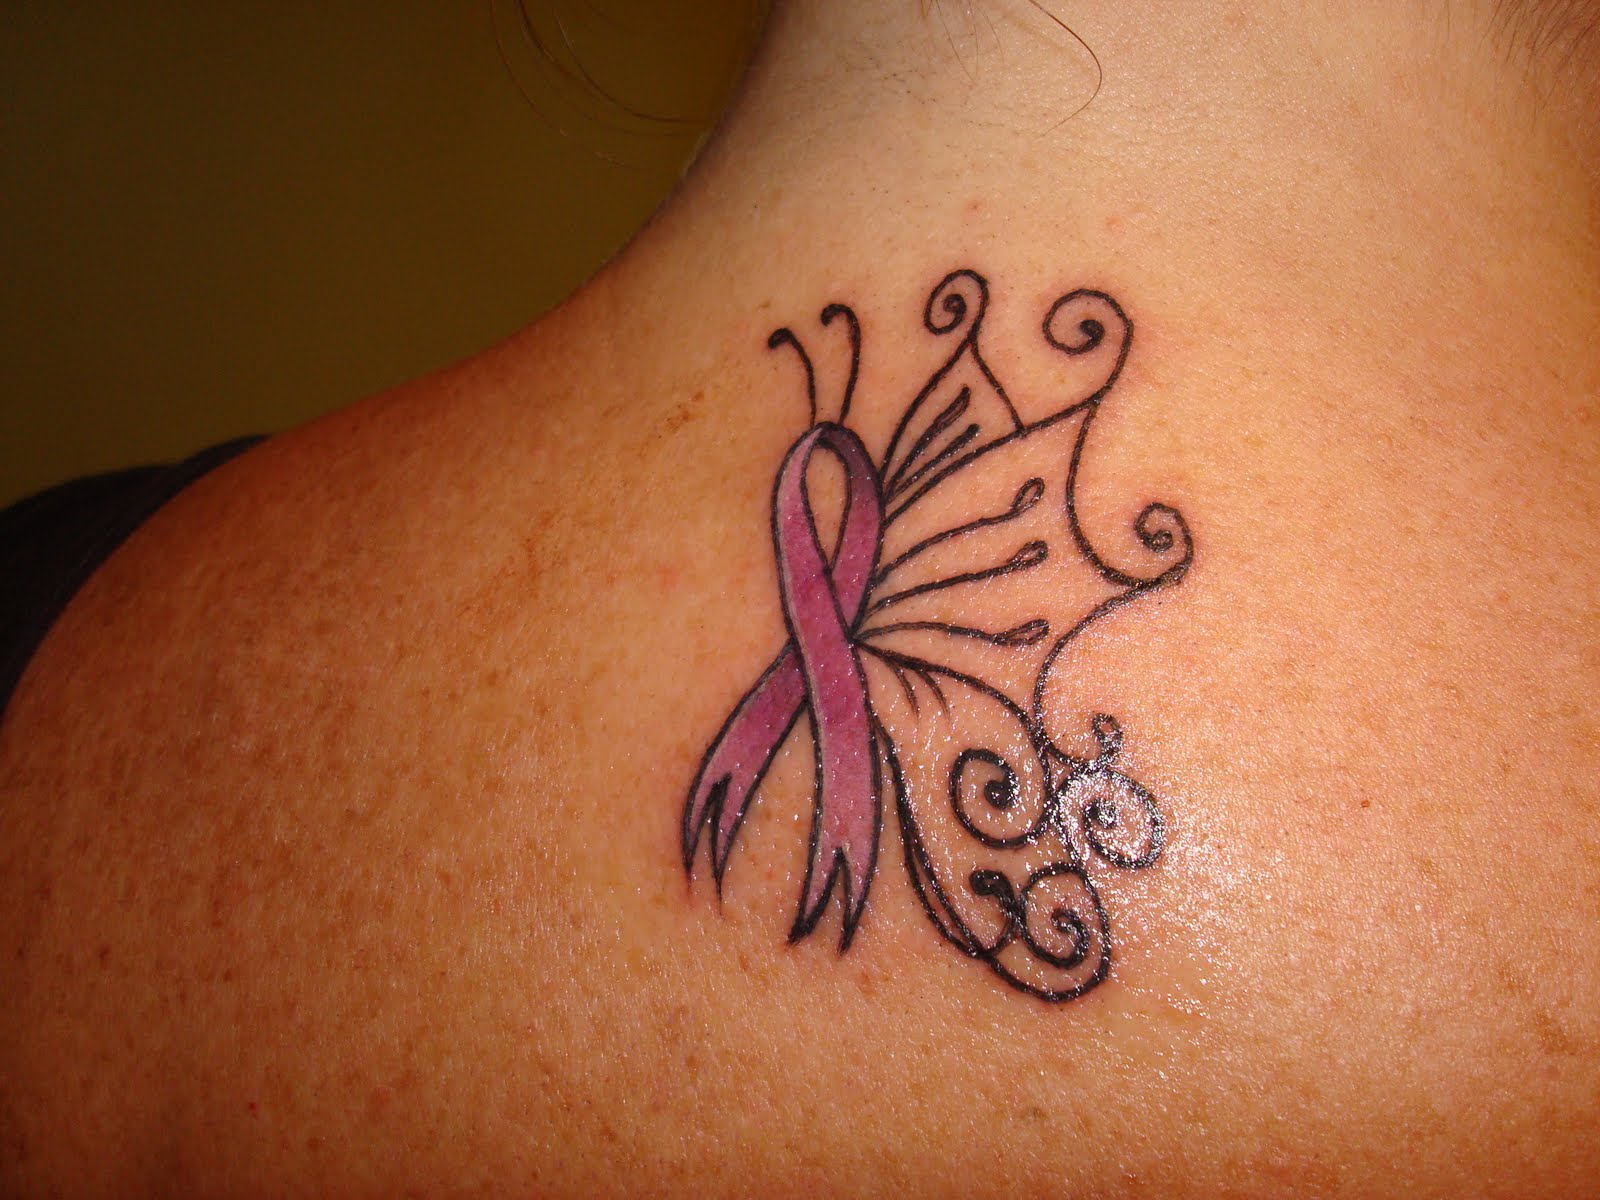 Cancer Ribbon Images Tattoos